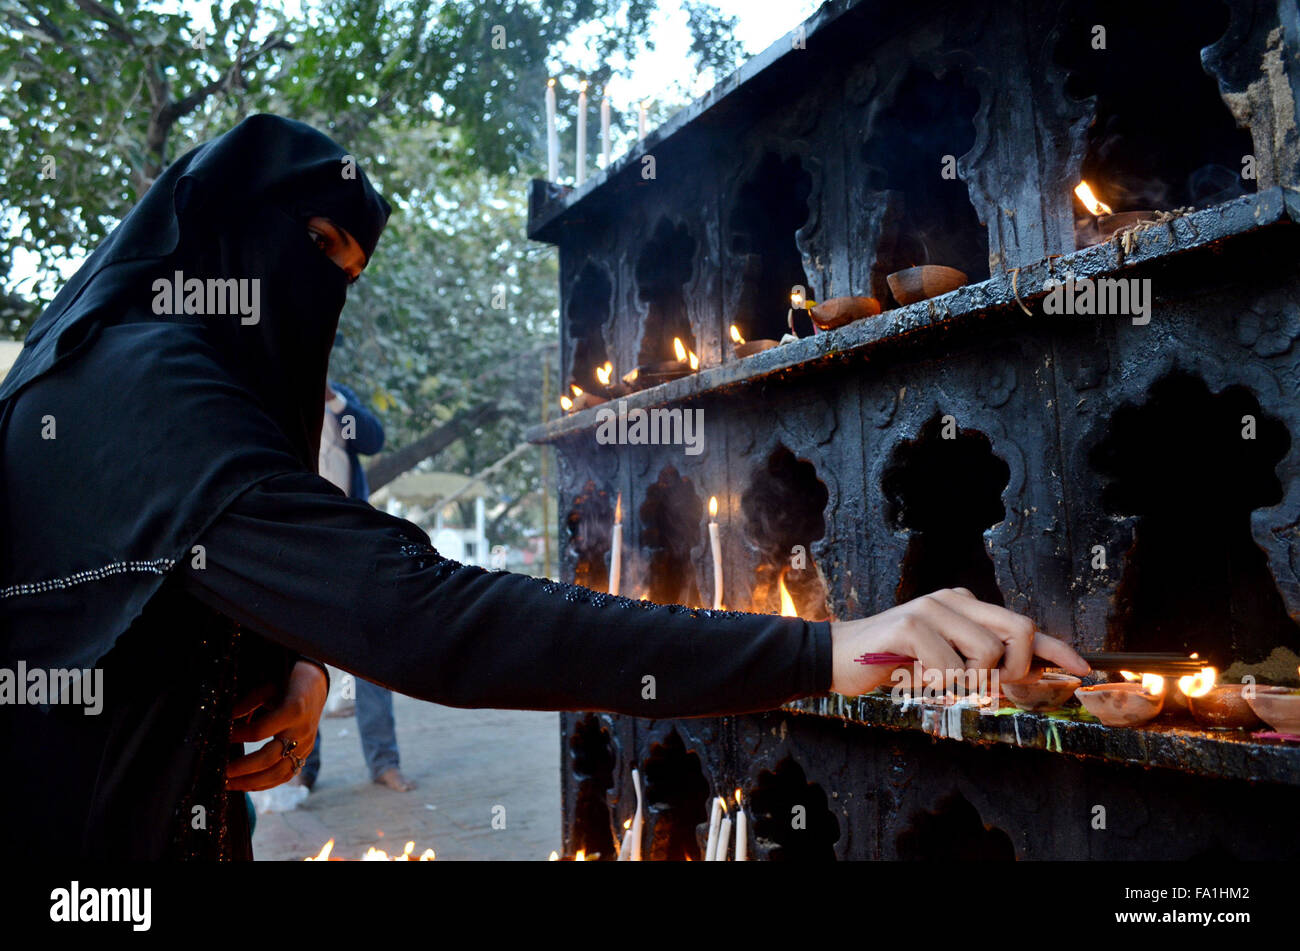 Lahore. 19th Dec, 2015. A Muslim devotee lights candles and oil lamps at the shrine of the Sufi saint Mian Mir Sahib during a festival to mark the saint's death anniversary in eastern Pakistan's Lahore, Dec. 19, 2015. Hundreds of devotees are attending the two-day festival. © Jamil Ahmed/Xinhua/Alamy Live News Stock Photo